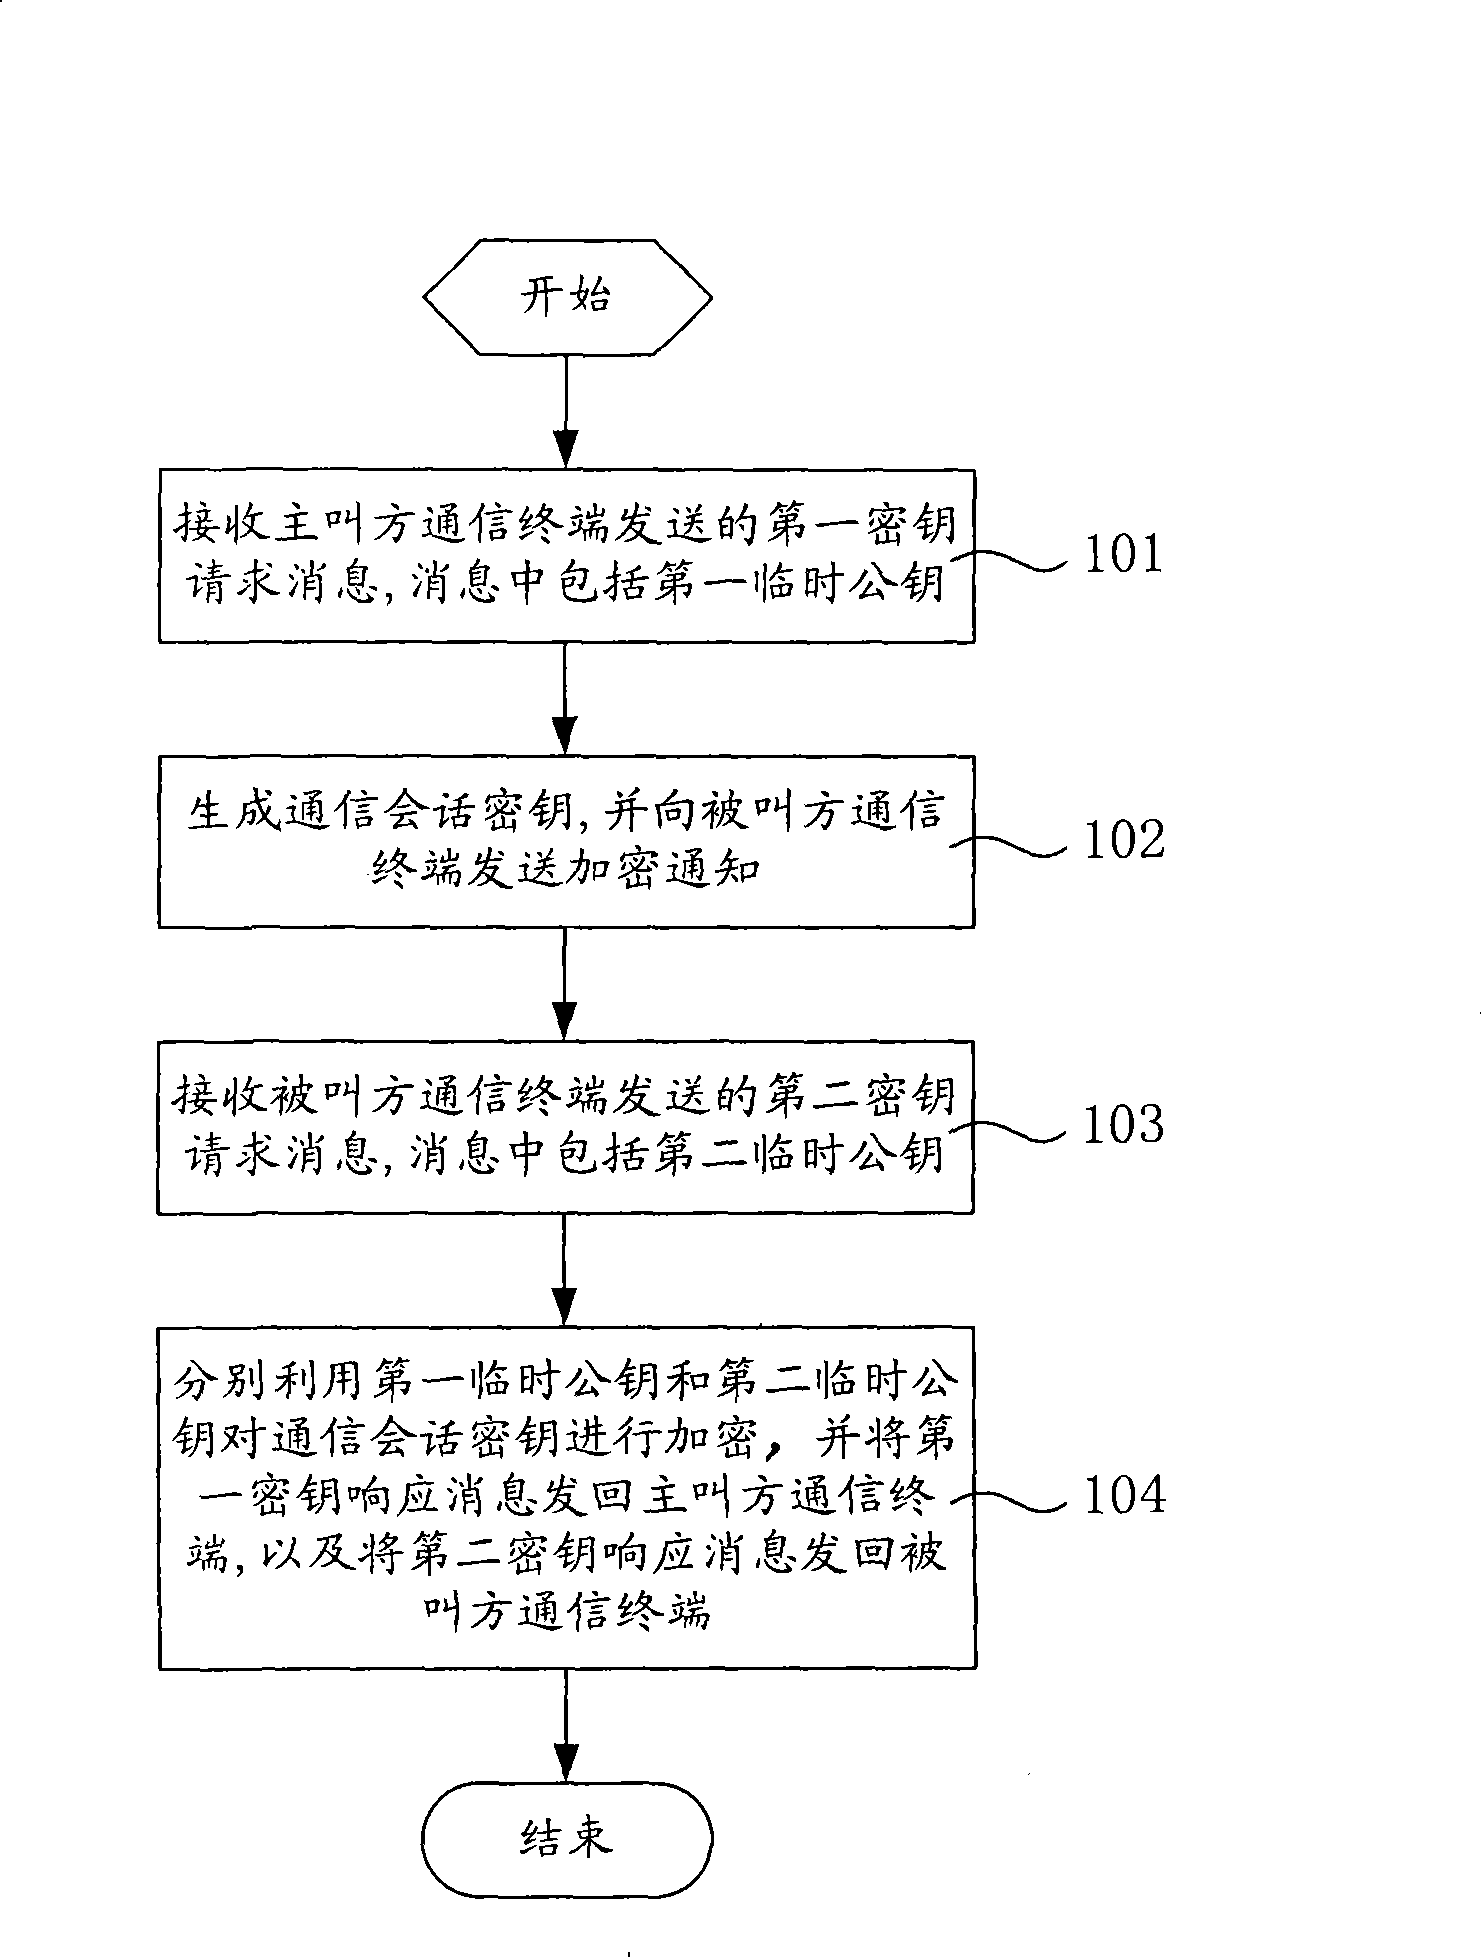 Session cipher key distributing method and system